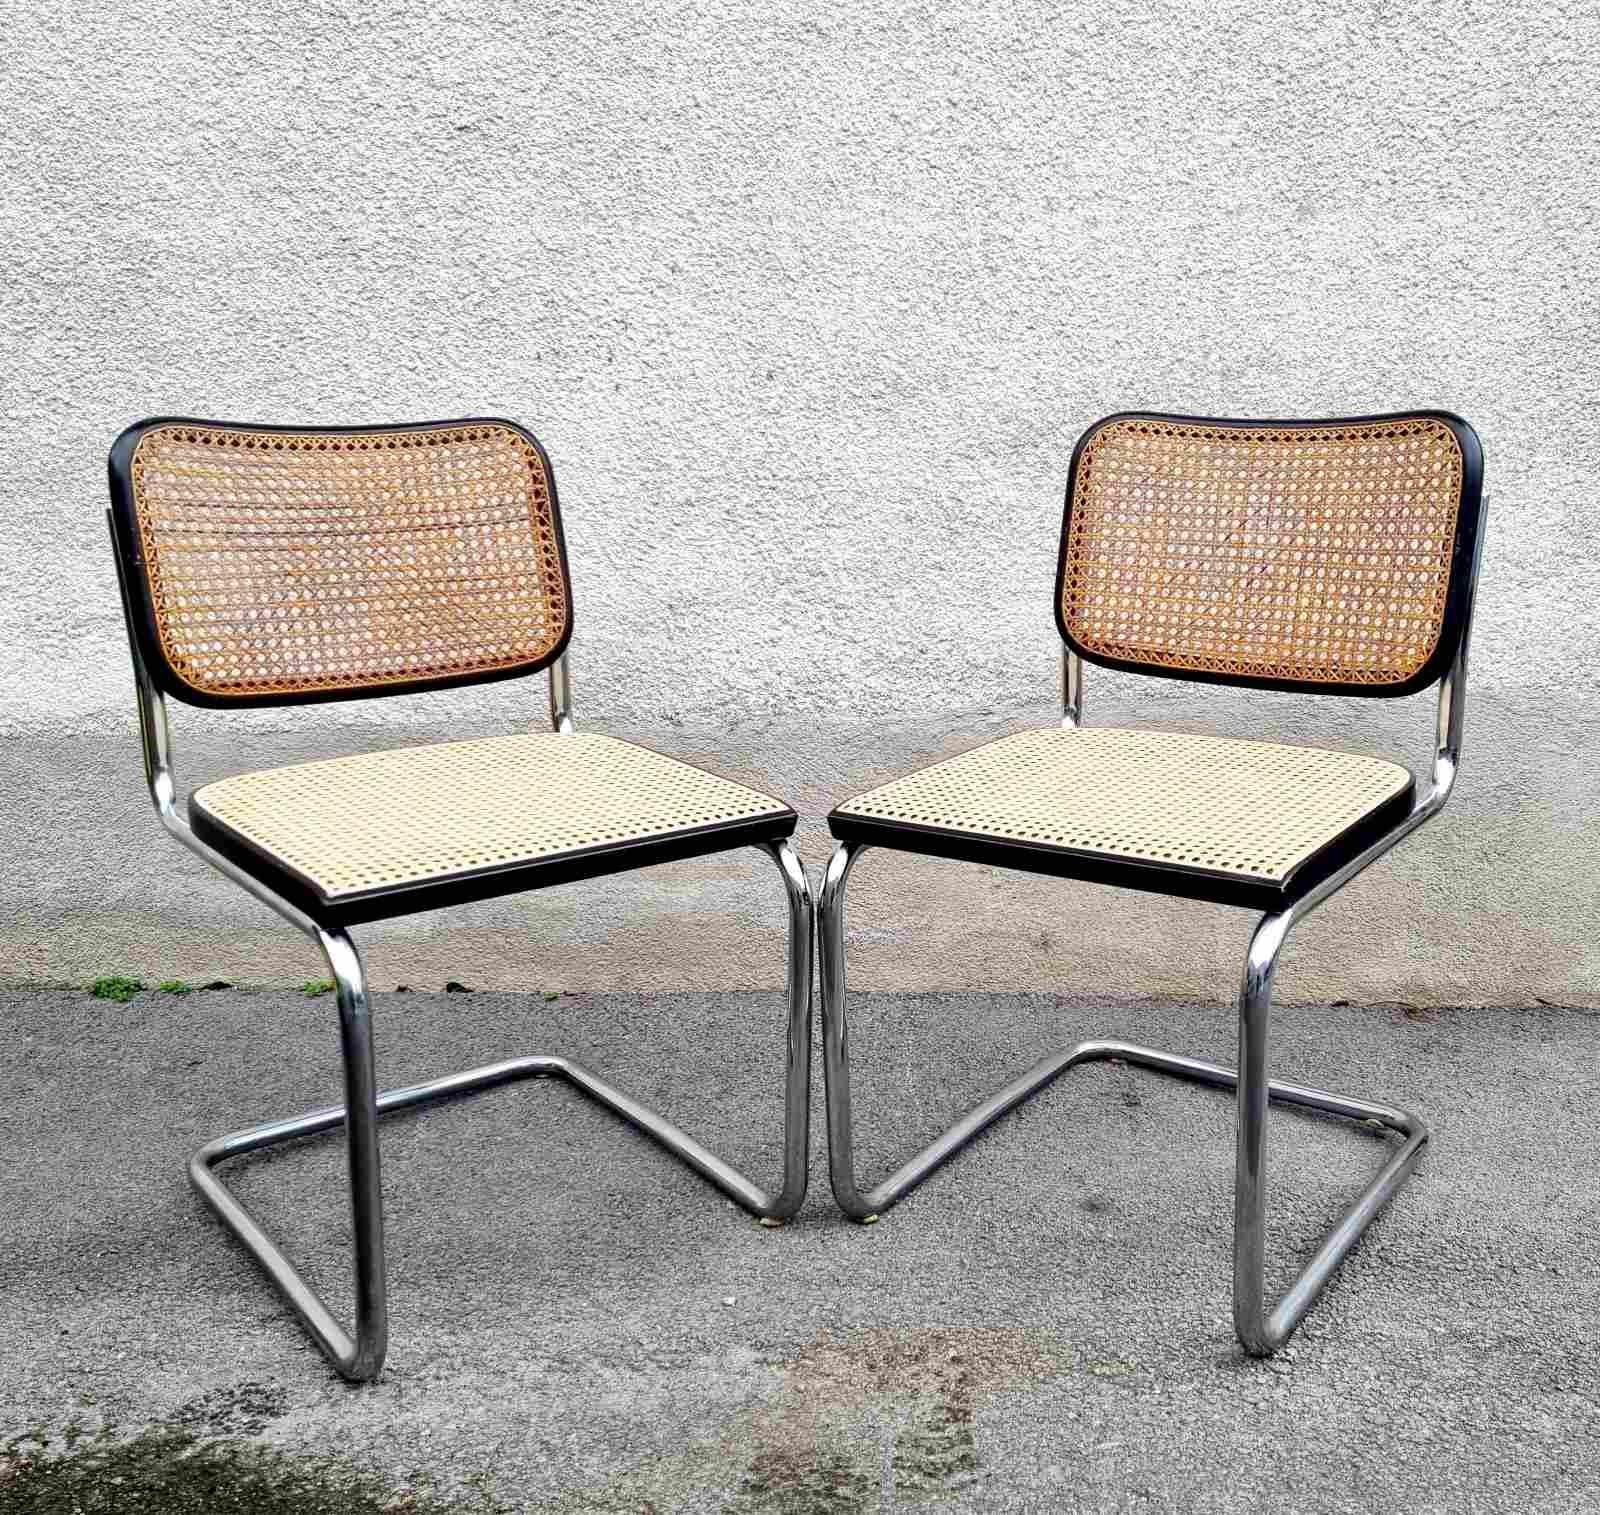 This pair of Marcel Breuer Cesca Chair was made in Italy in '60s by Gavina 
The chairs are labeled
It's fabulous iconic piece of furniture and also very comfortable to sit on. It's perfect for the dining area or as a decorative vintage piece for